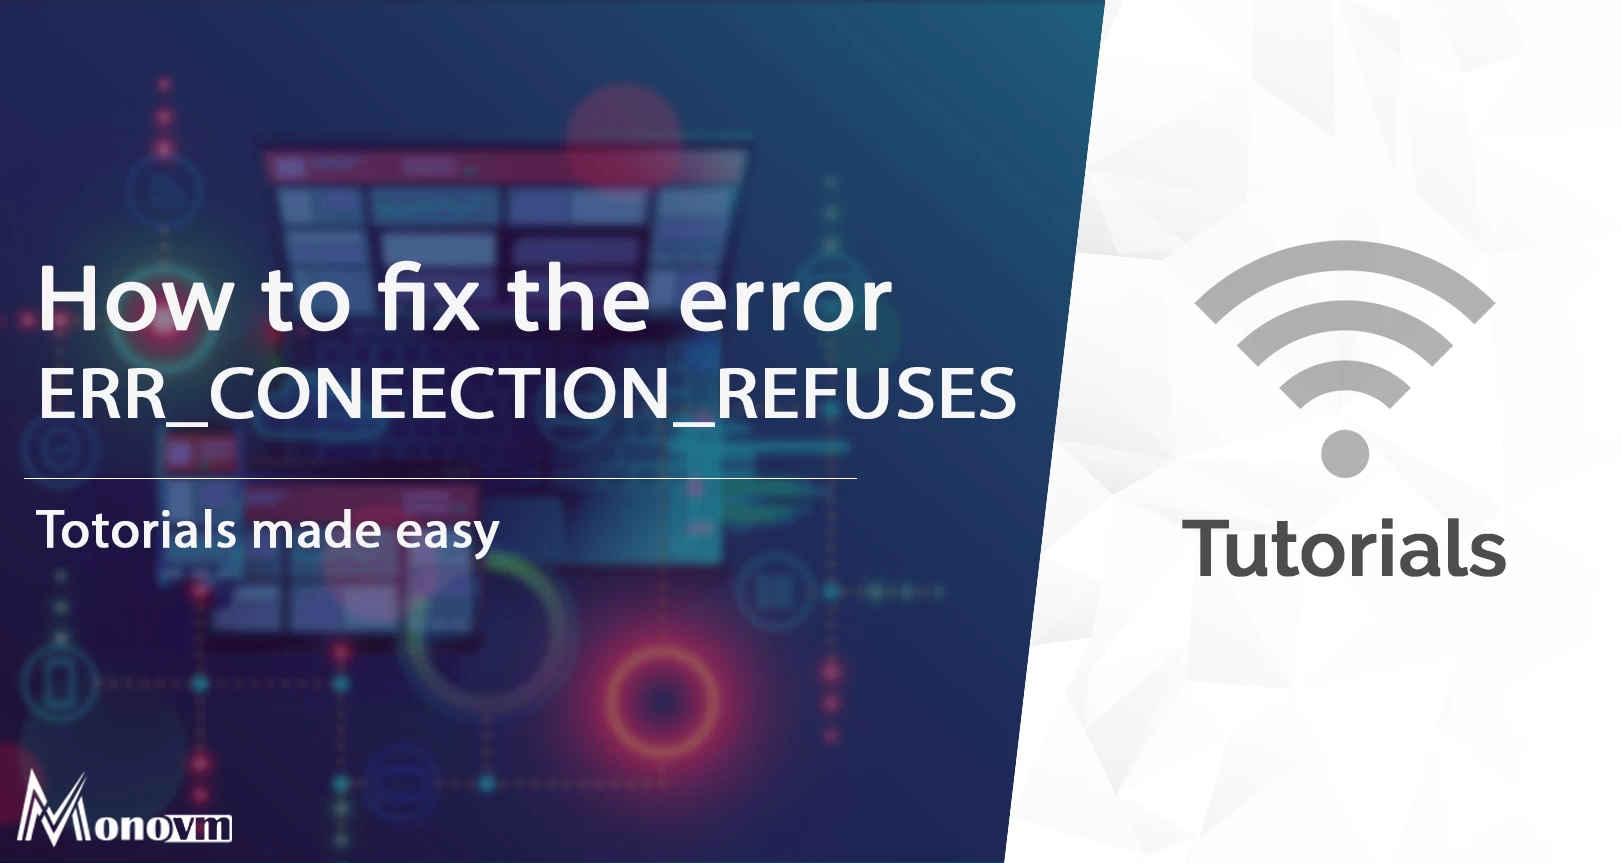 6 Ways to Fix ERR_CONNECTION_REFUSED Error in Chrome